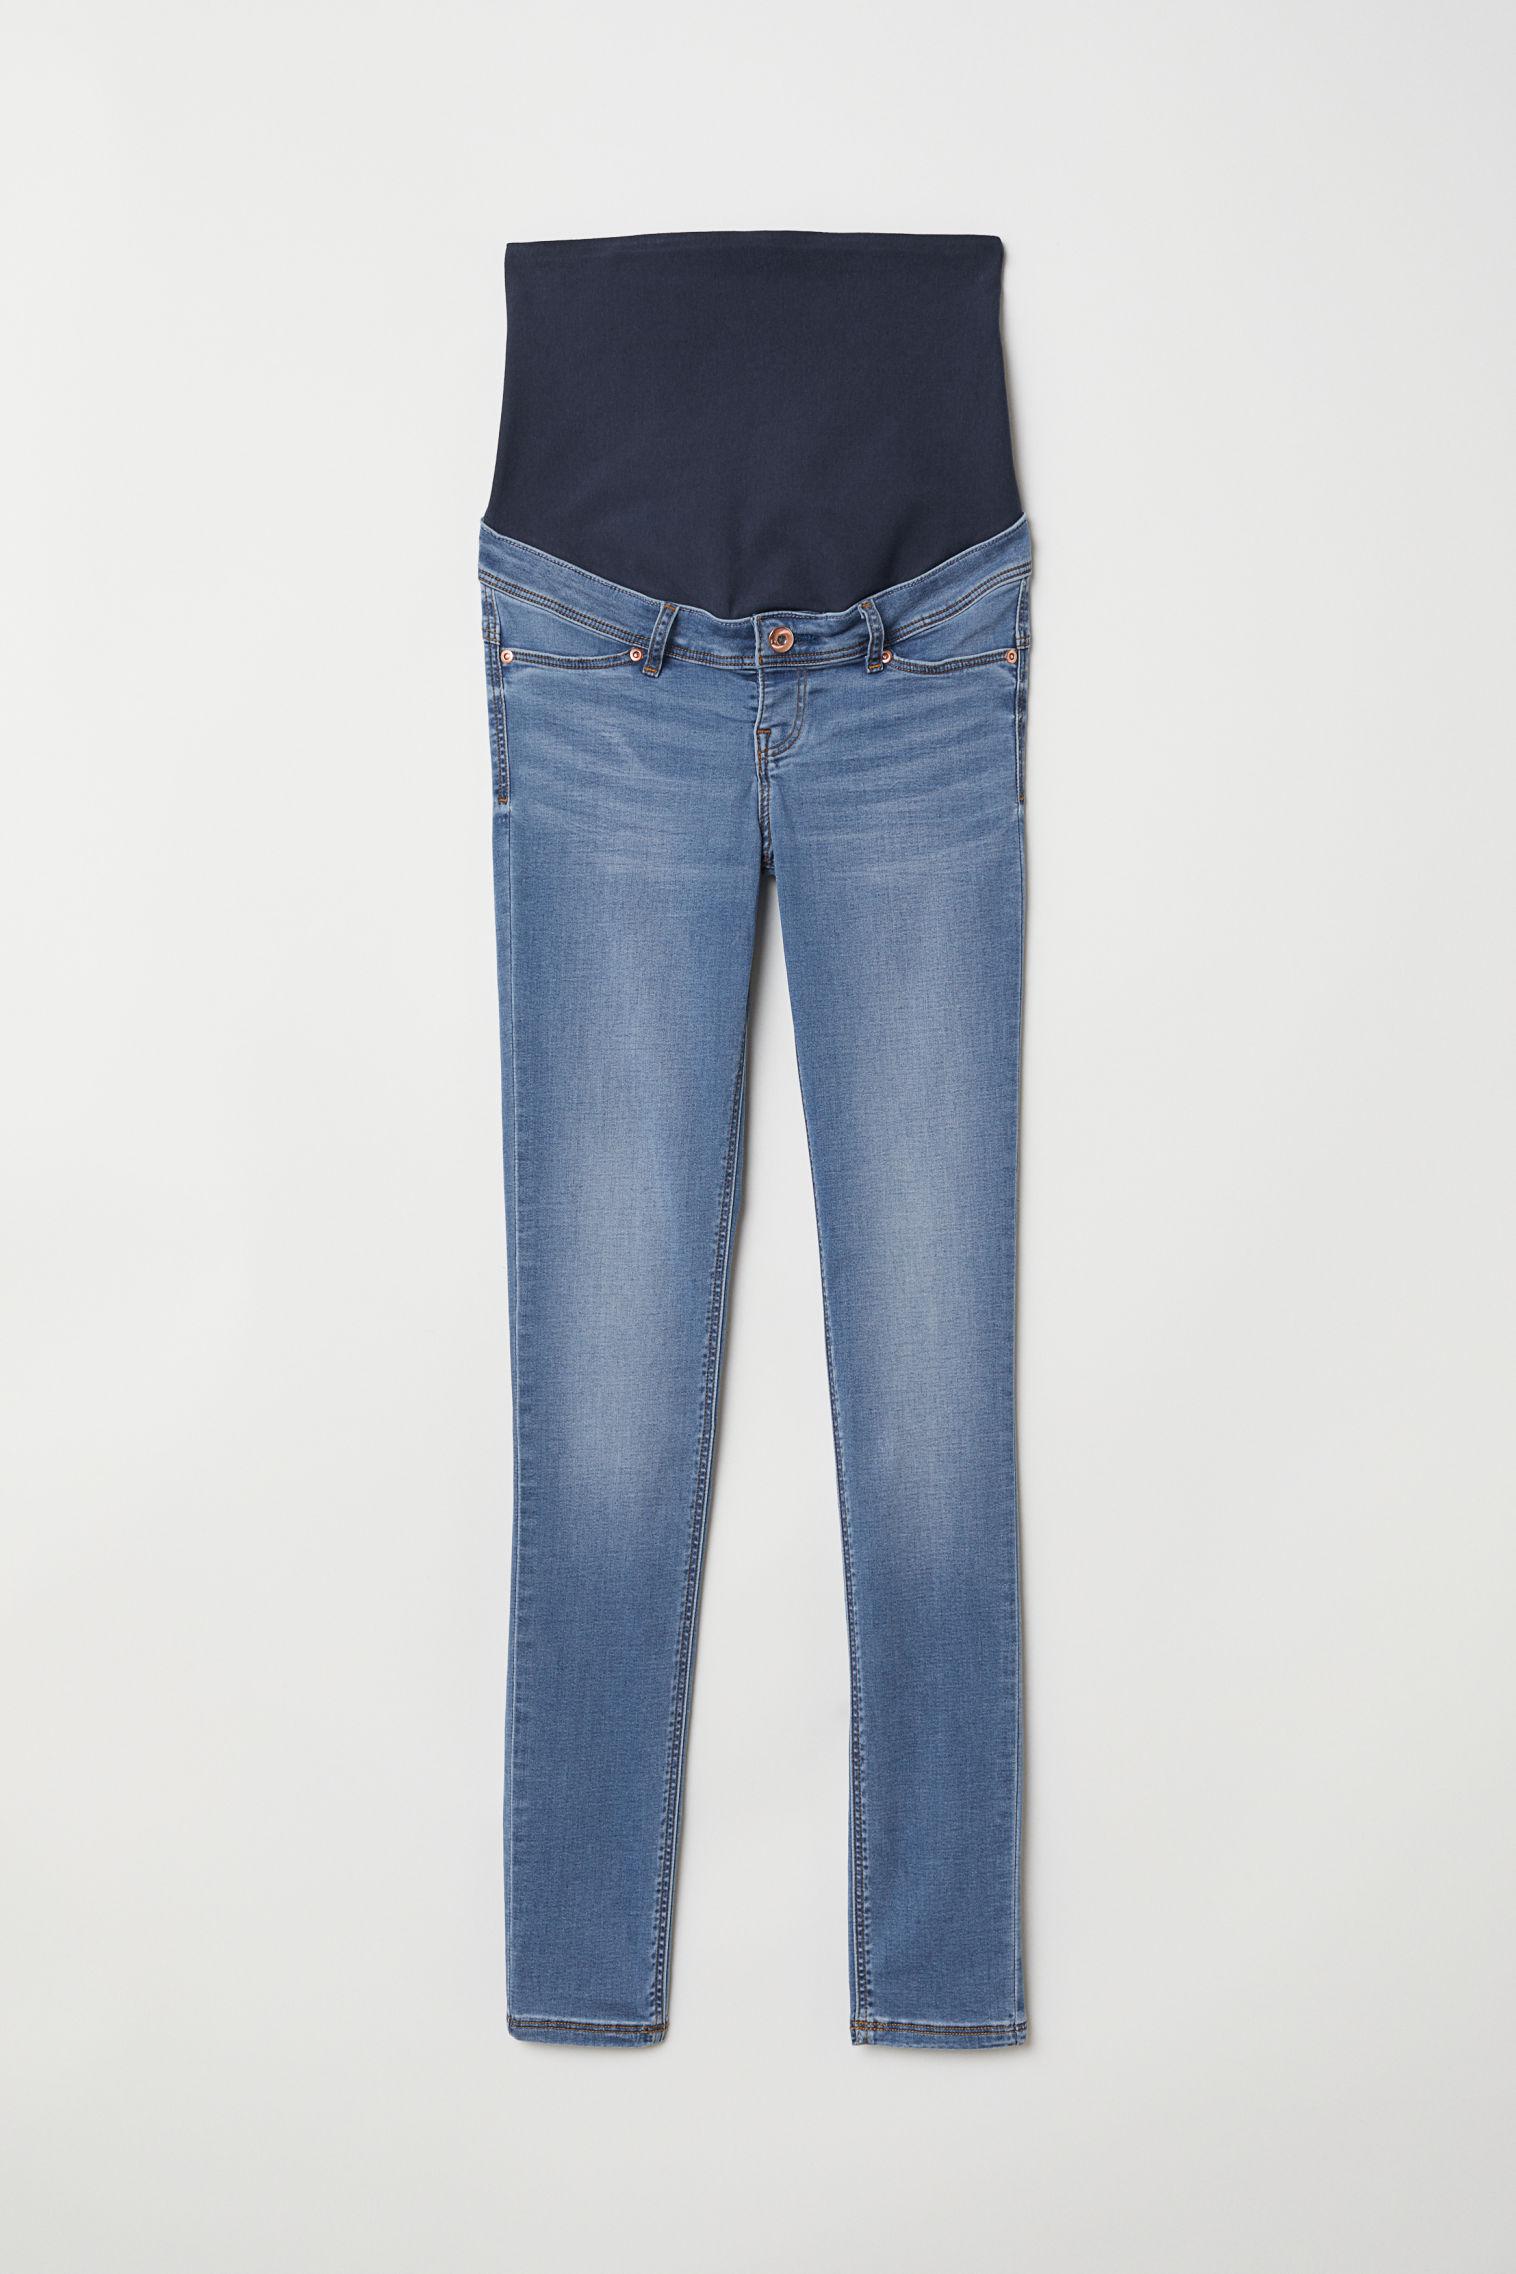 H&M Denim Mama Feather Soft Jeggings in Blue - Lyst